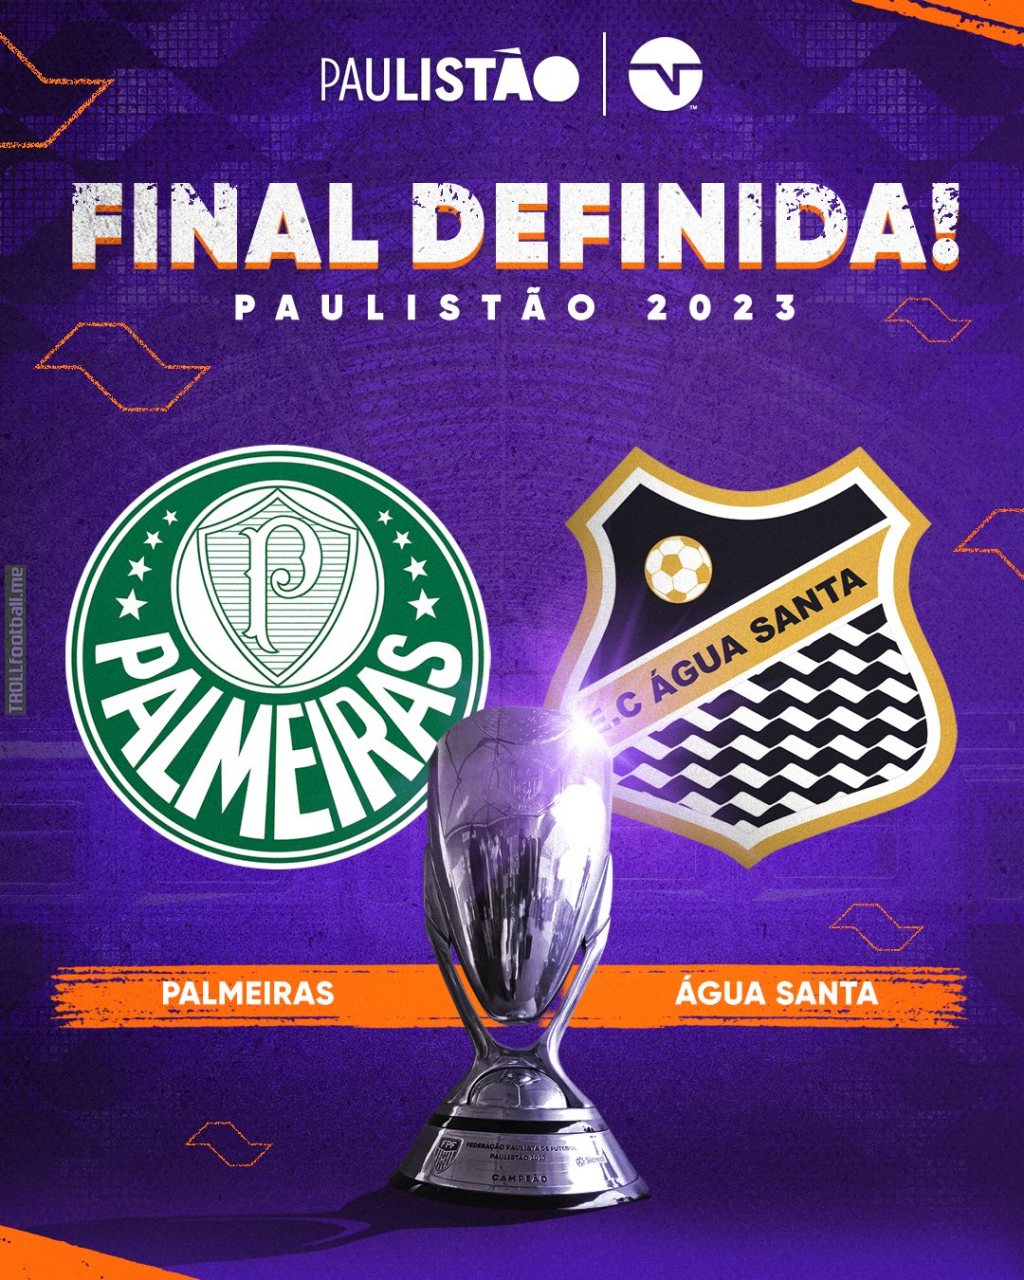 EC Água Santa, a small club from the interior of São Paulo without a national division, has reached the finals of the Campeonato Paulista 2023 after defeating Red Bull Bragantino in the penalties. Ahead of traditional powerhouses such as Santos, São Paulo and Corinthians